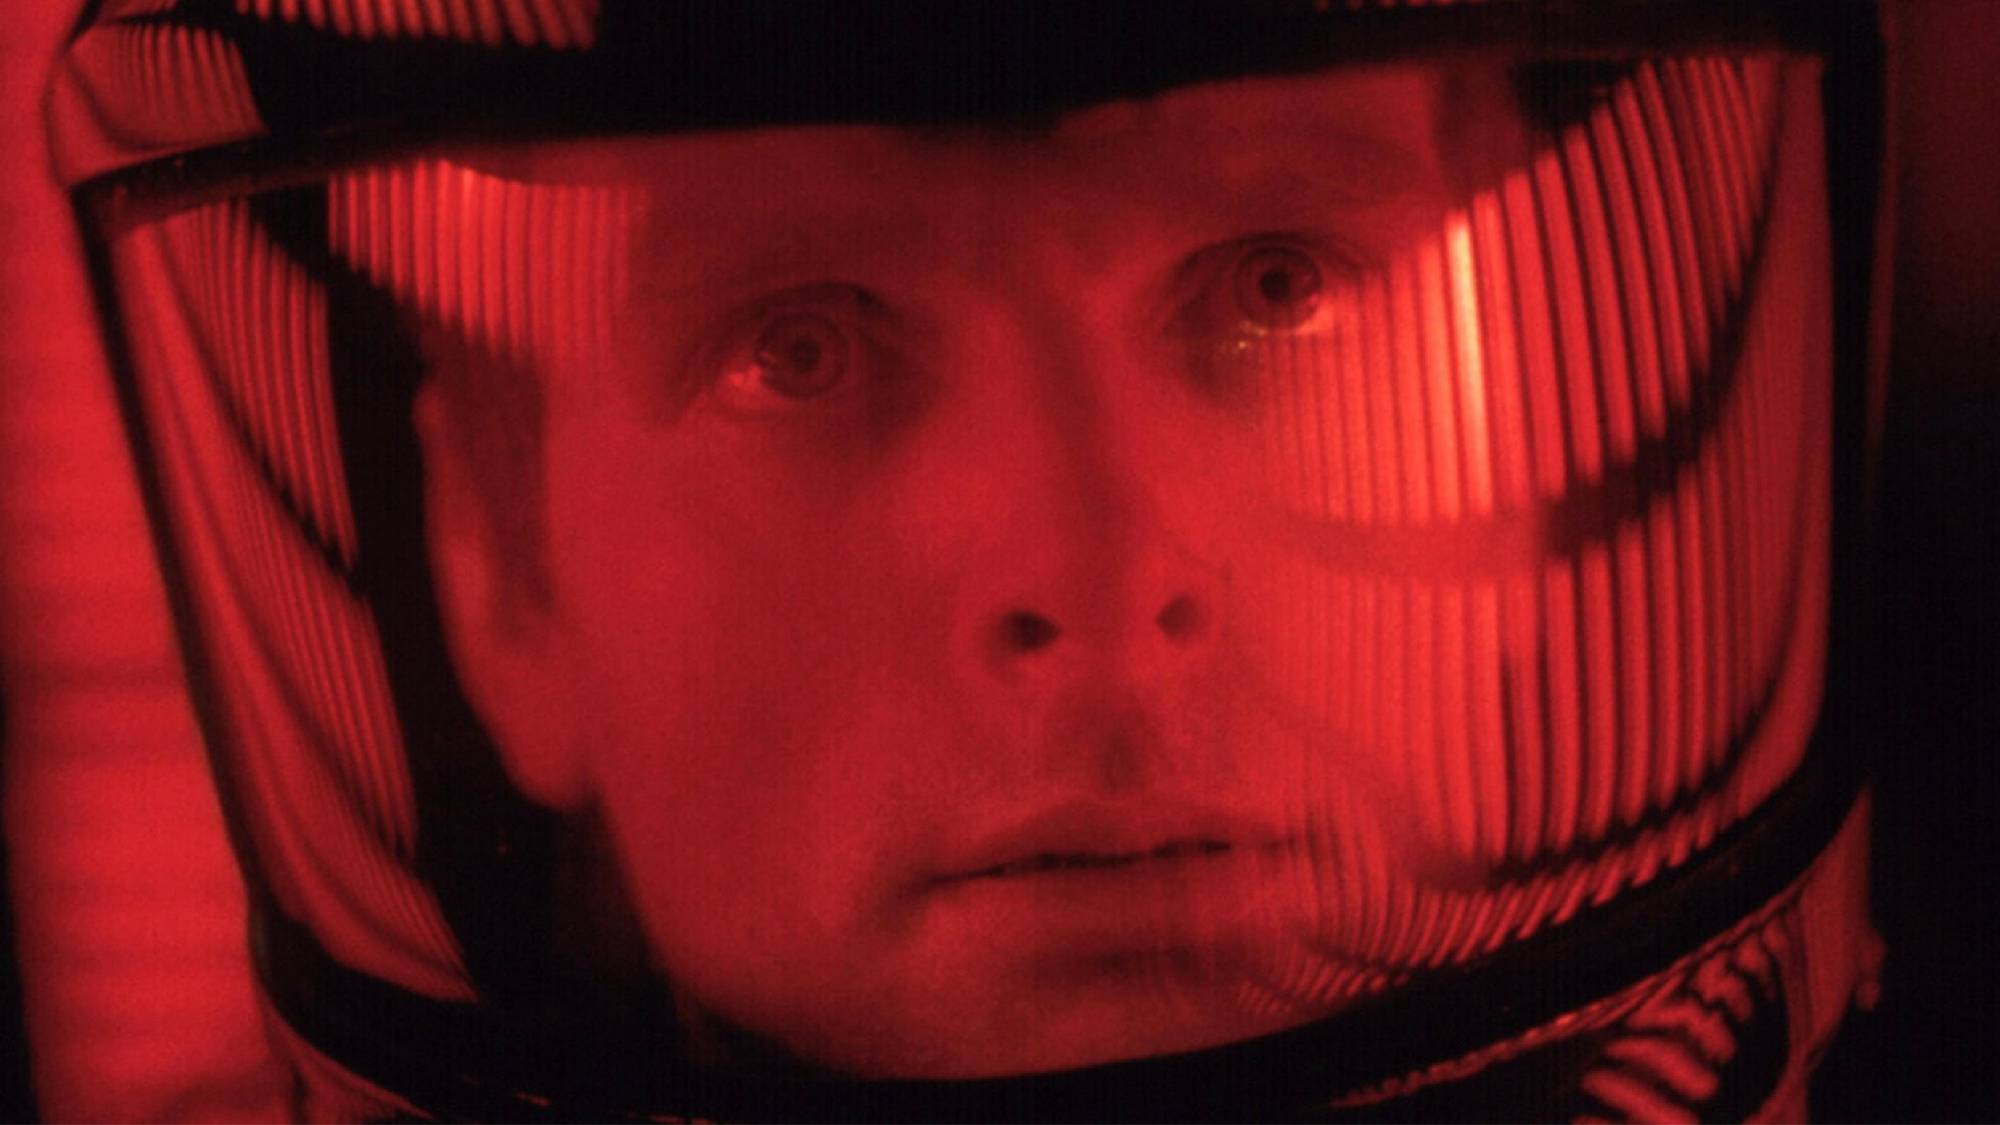 Keir Dullea as Dr. David Bowman in 2001: A Space Odyssey